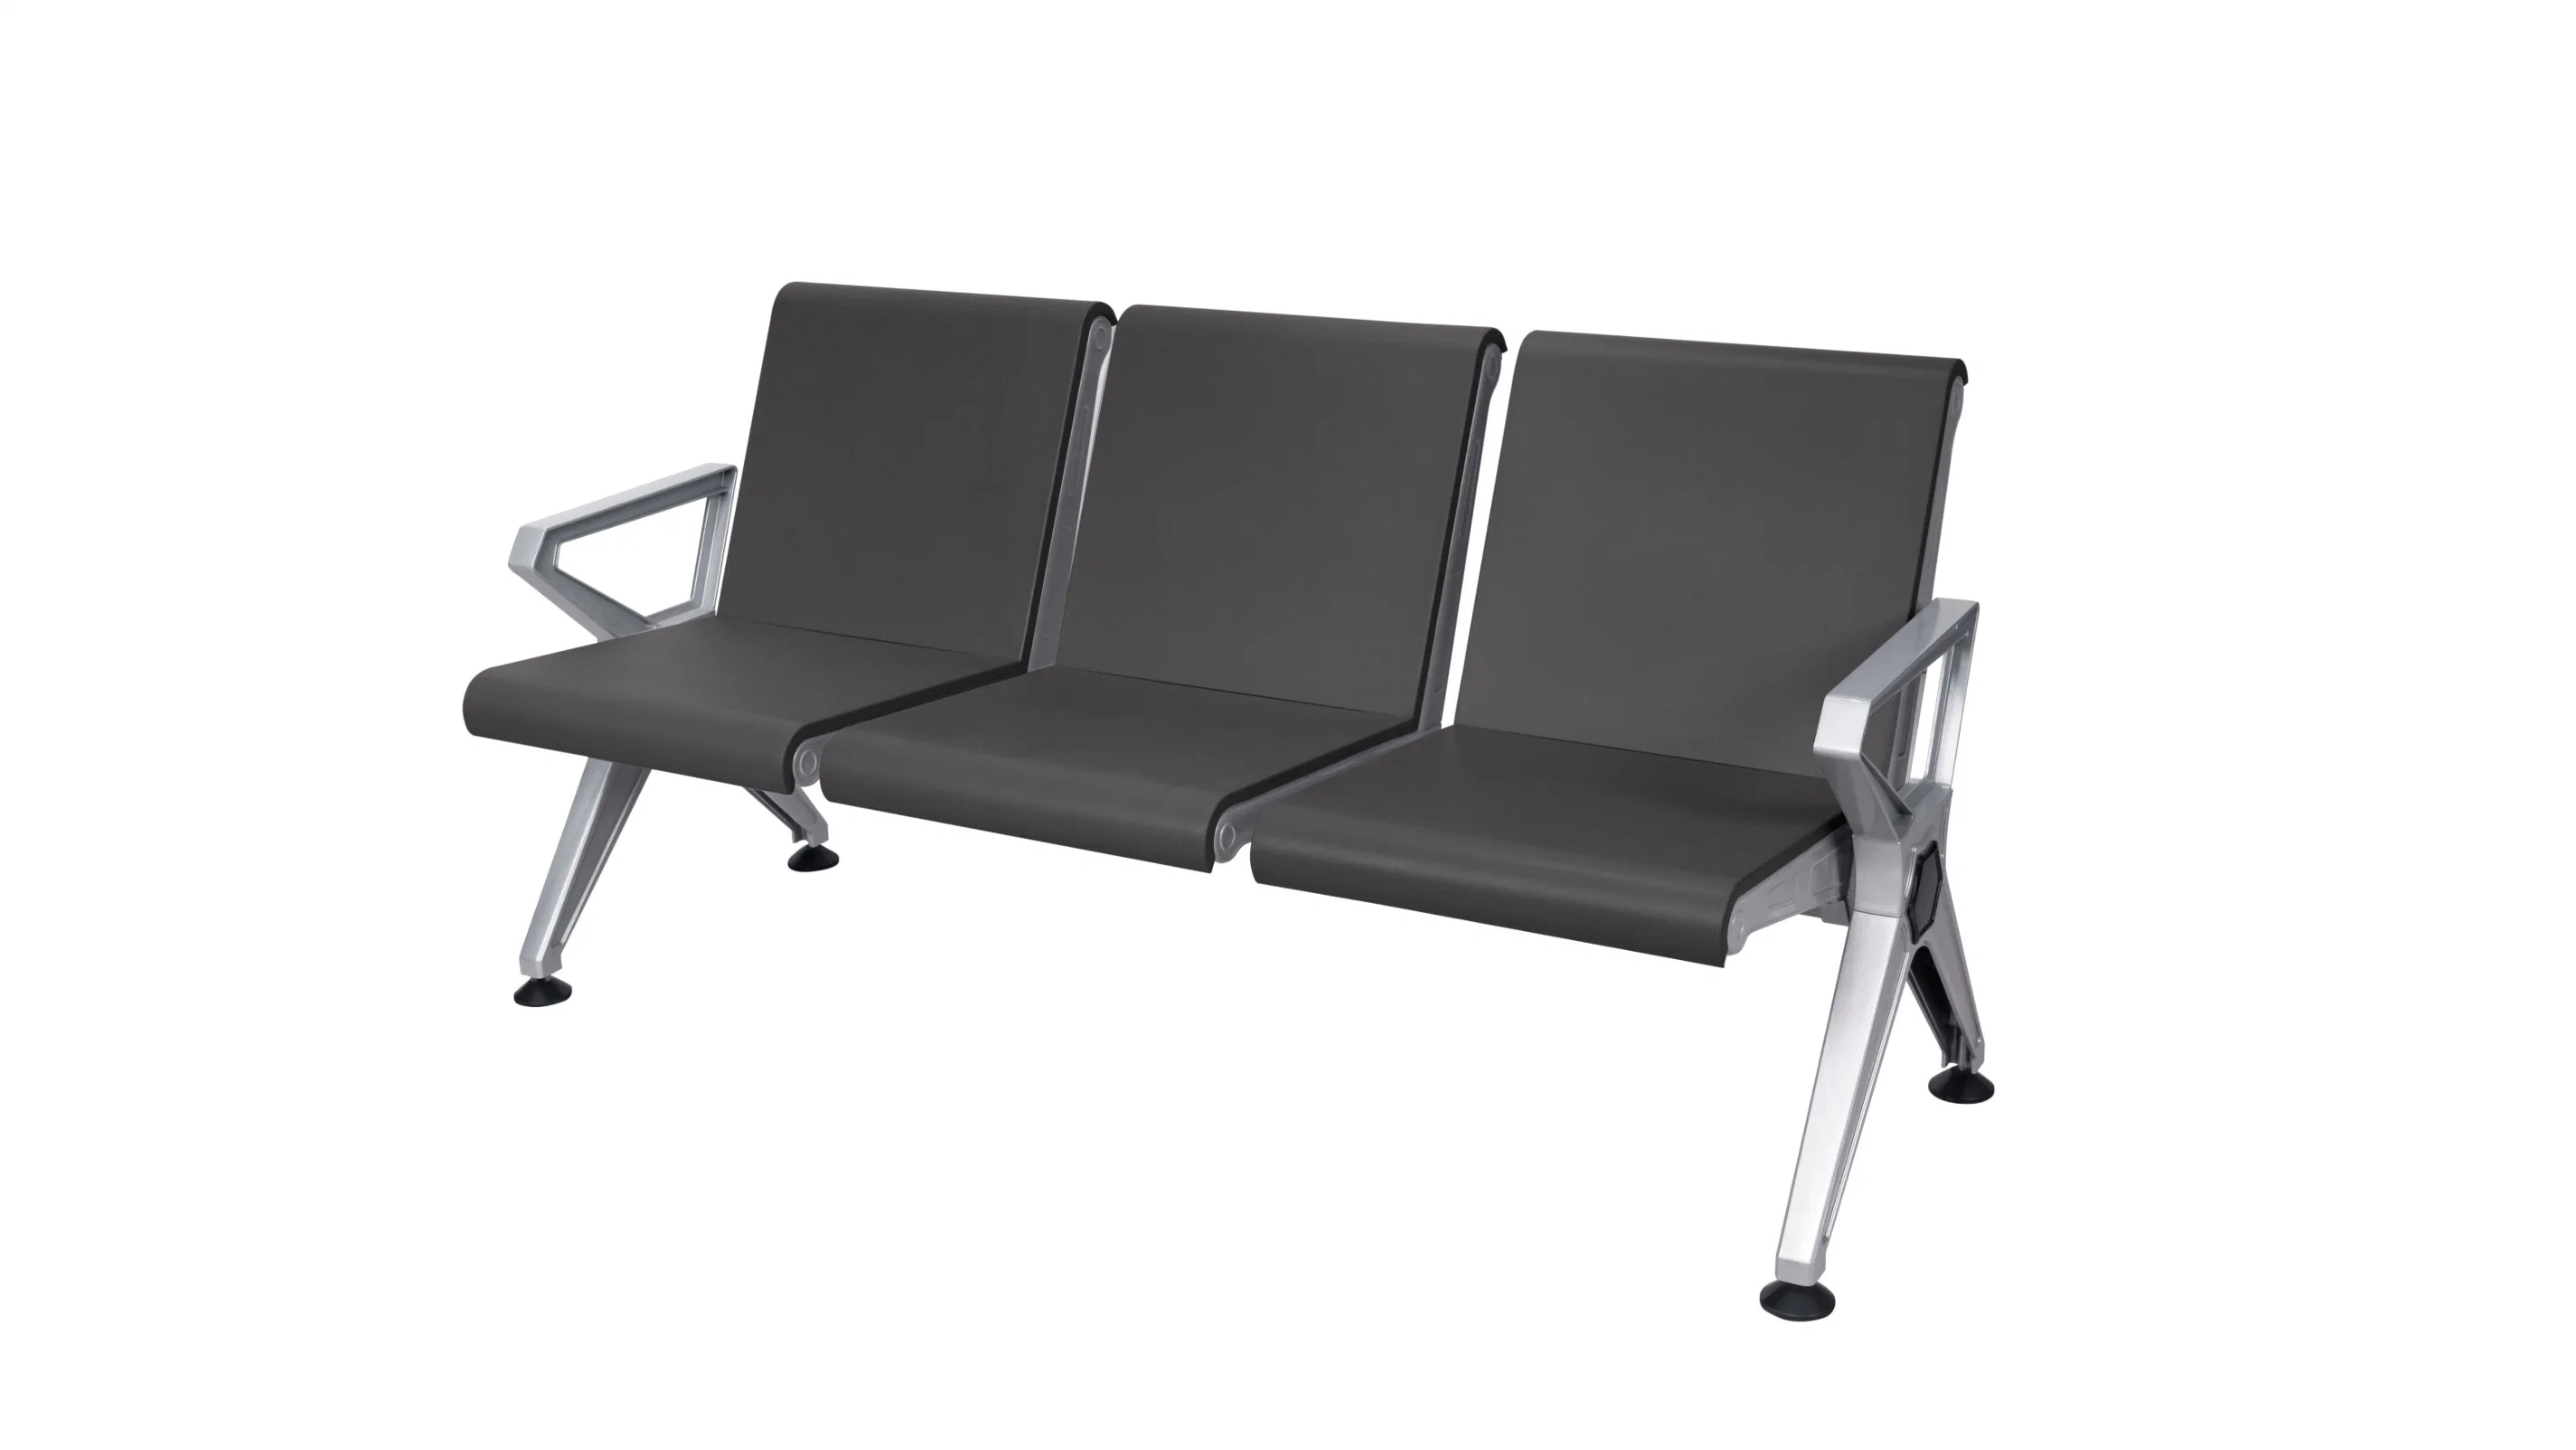 High Quality Airport Hospital Office Hotel Lobby Lounge Metal Seat Waiting Area Furniture